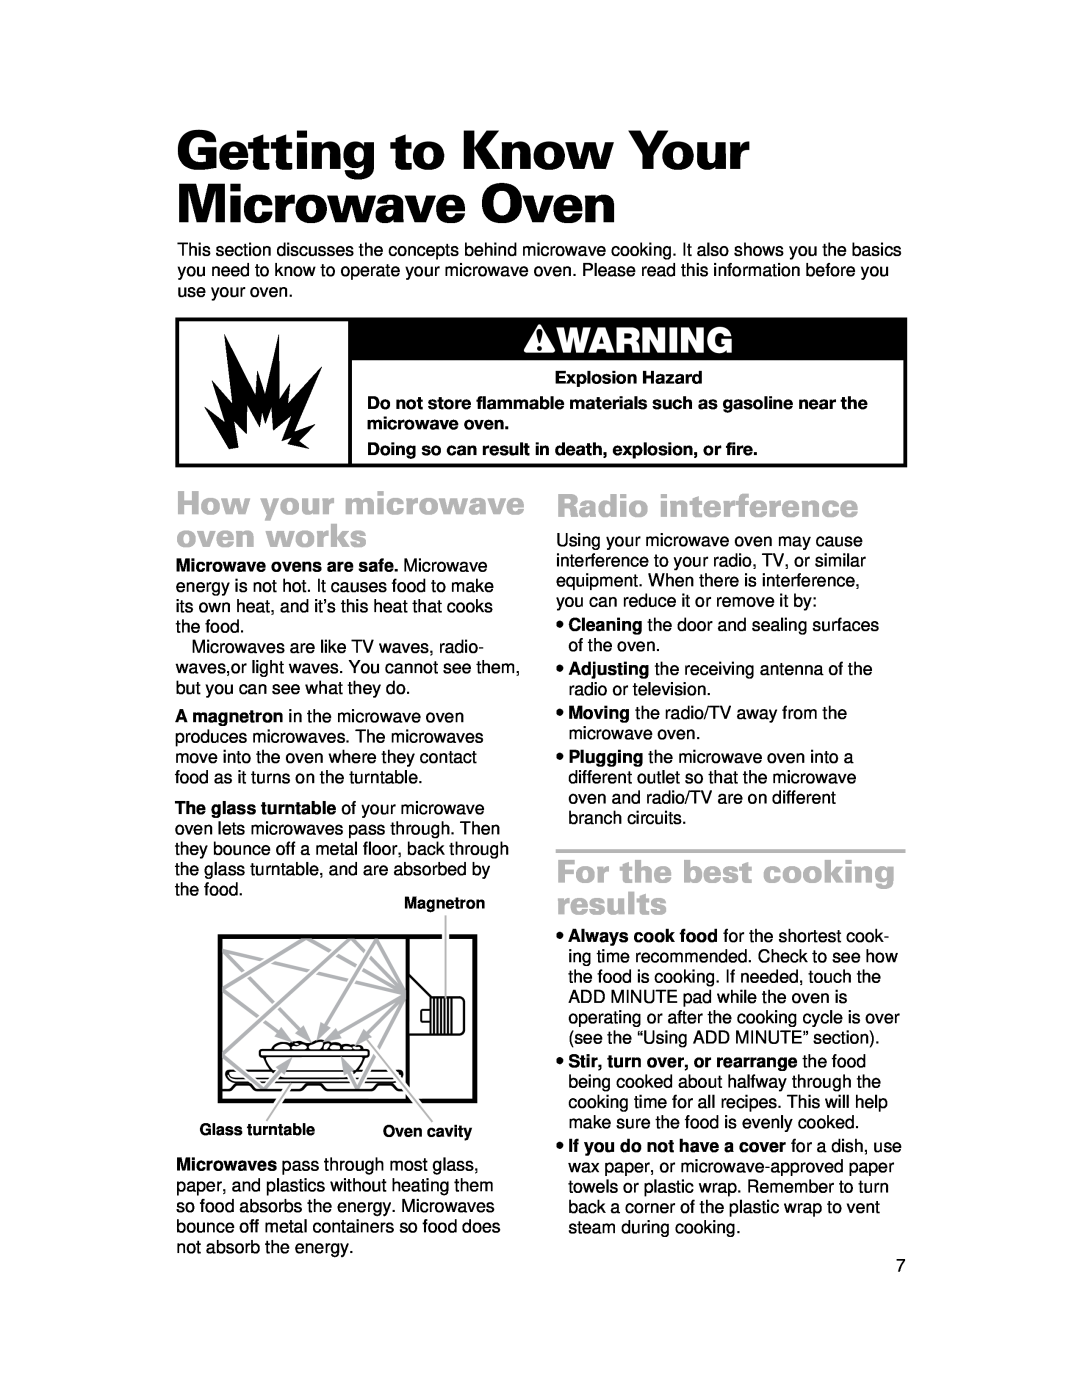 Whirlpool CMT061SG Getting to Know Your Microwave Oven, How your microwave oven works, Radio interference, wWARNING 